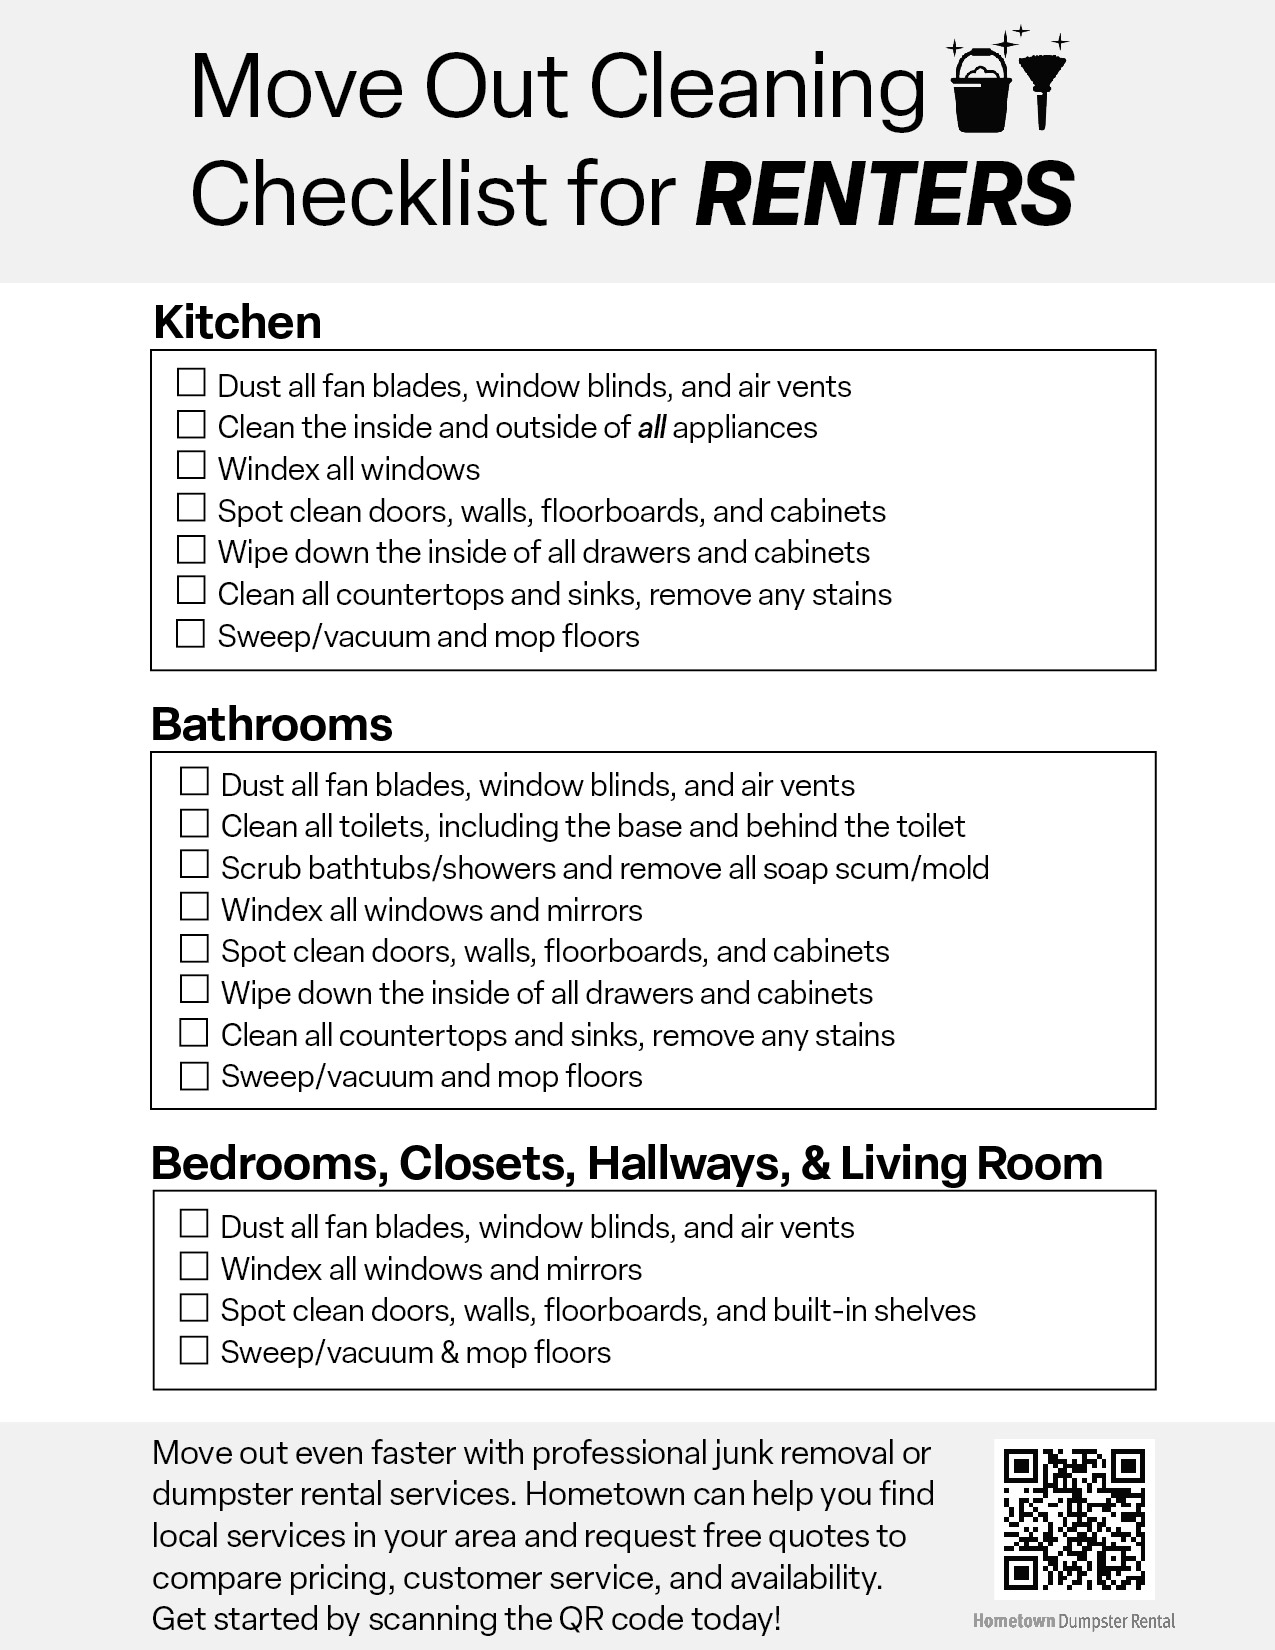 move out checklist for renters infographic